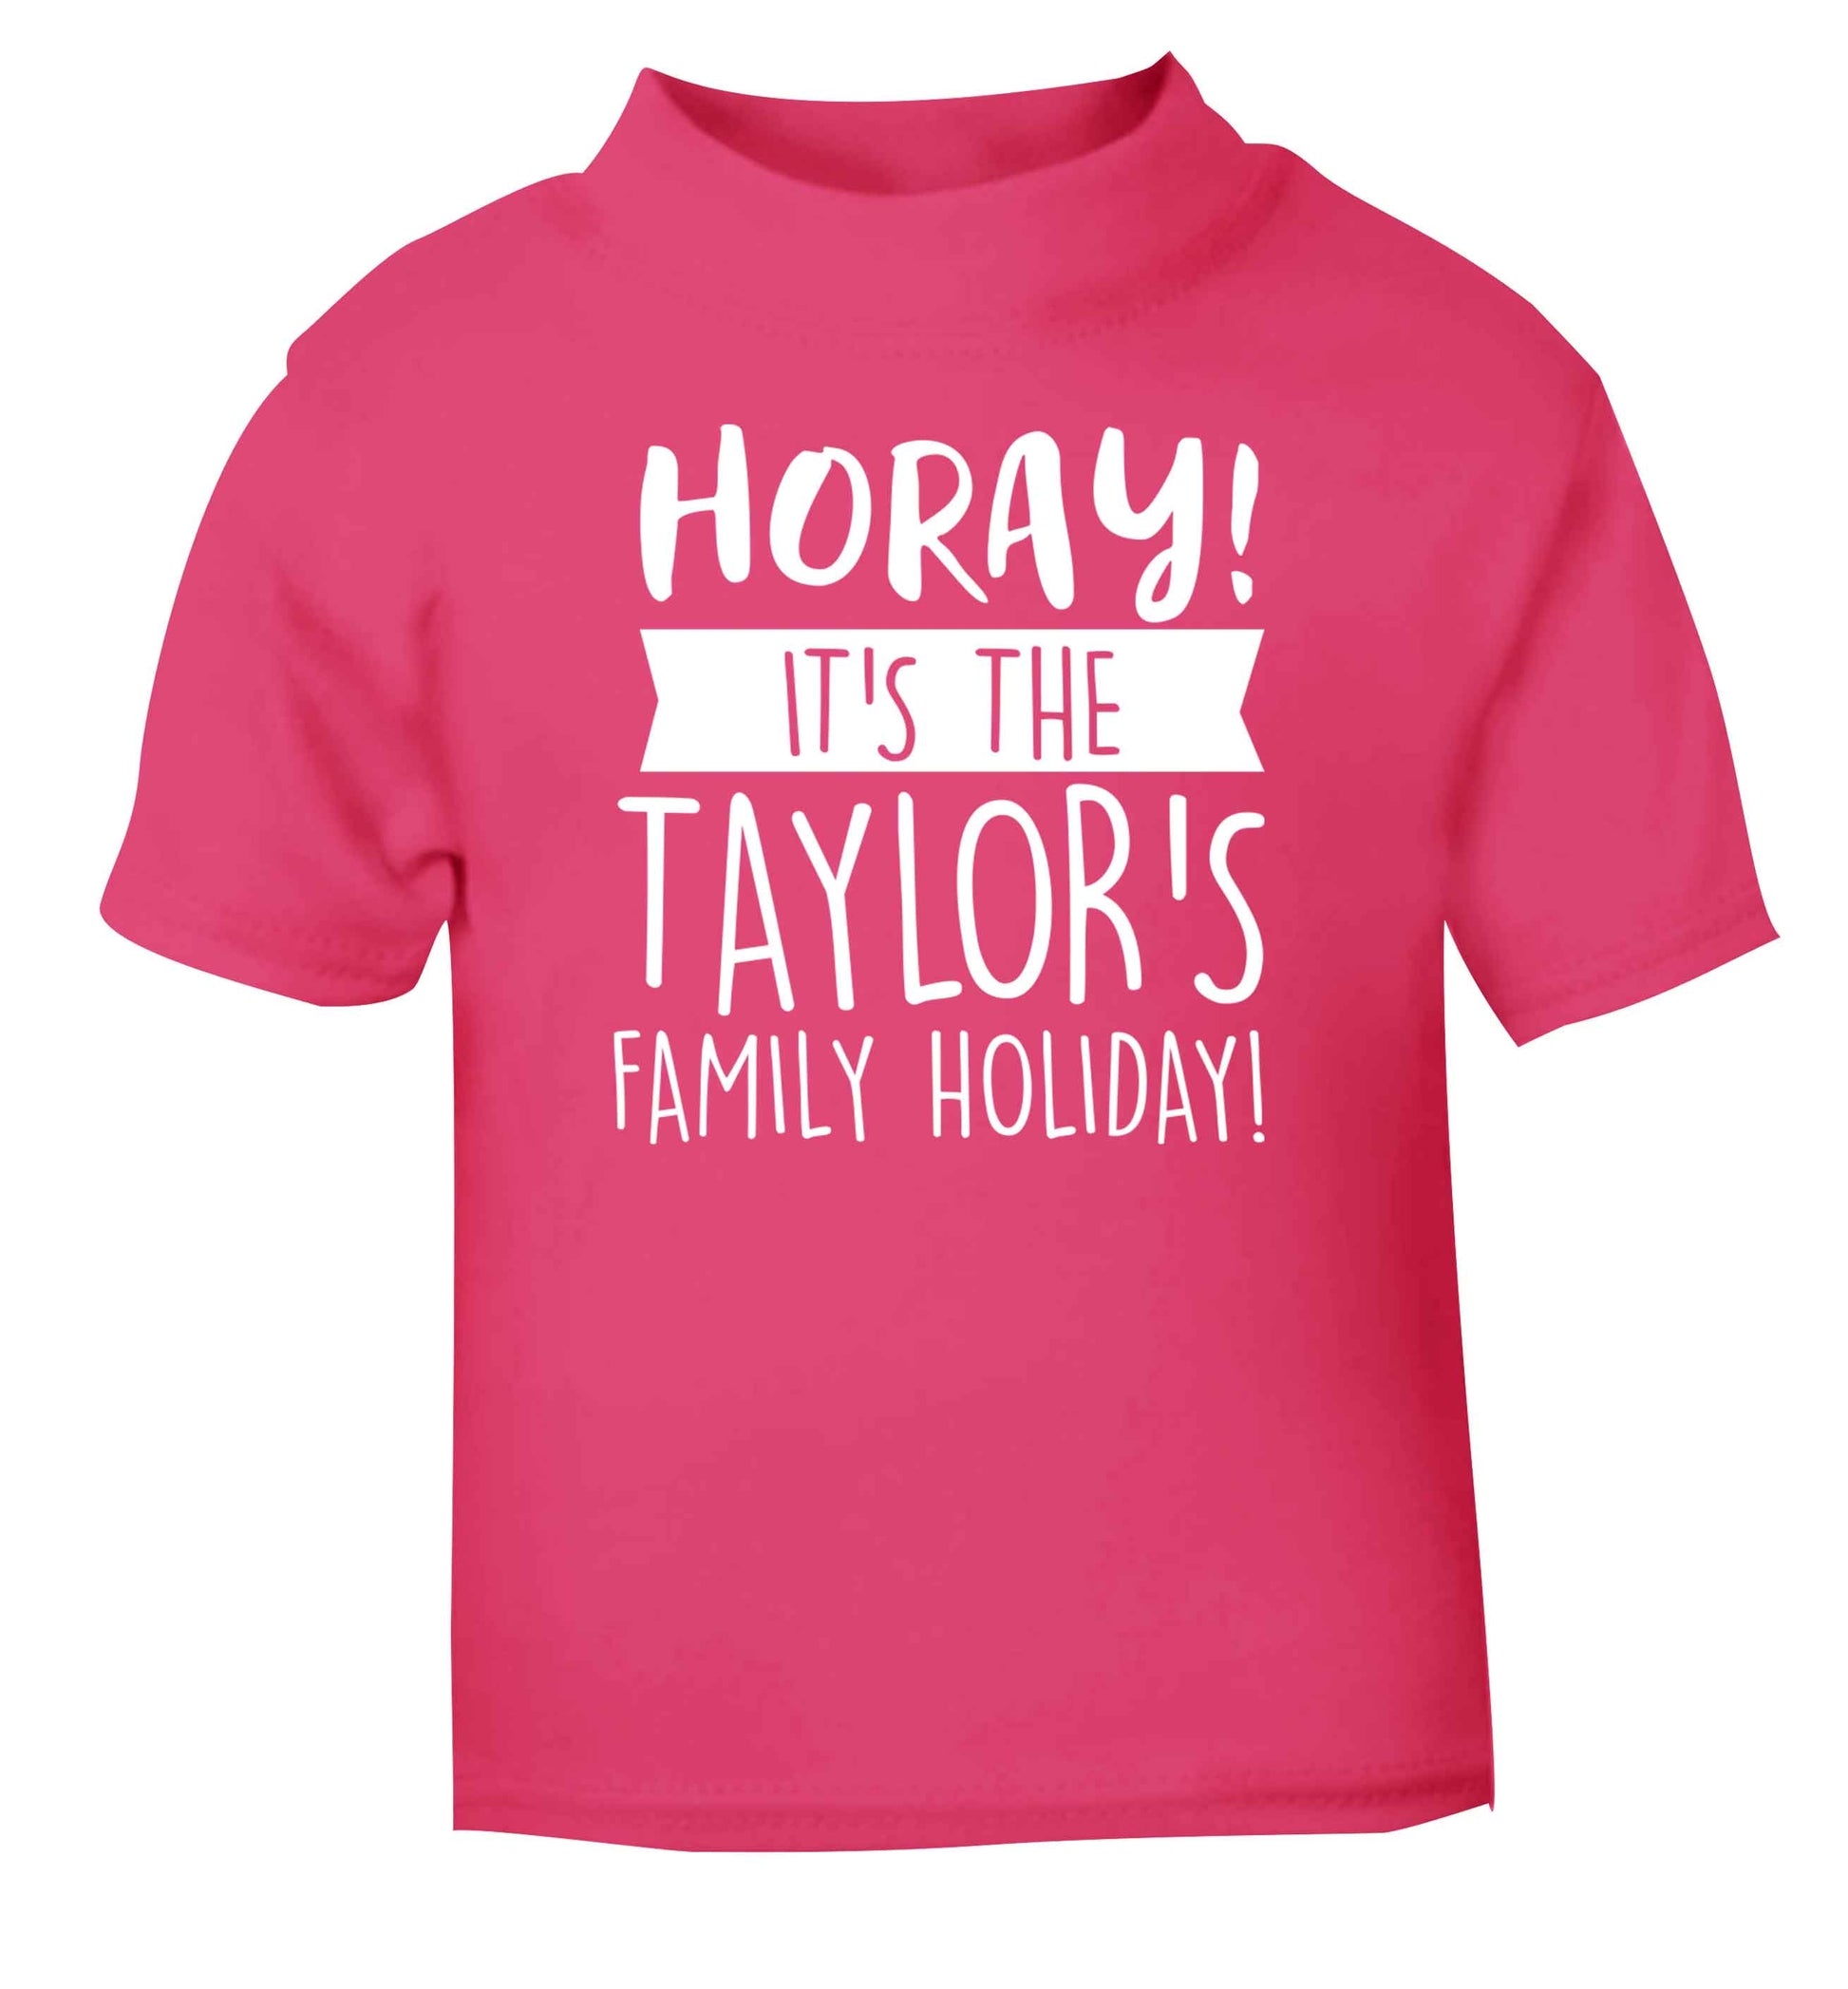 Horay it's the Taylor's family holiday! personalised item pink Baby Toddler Tshirt 2 Years